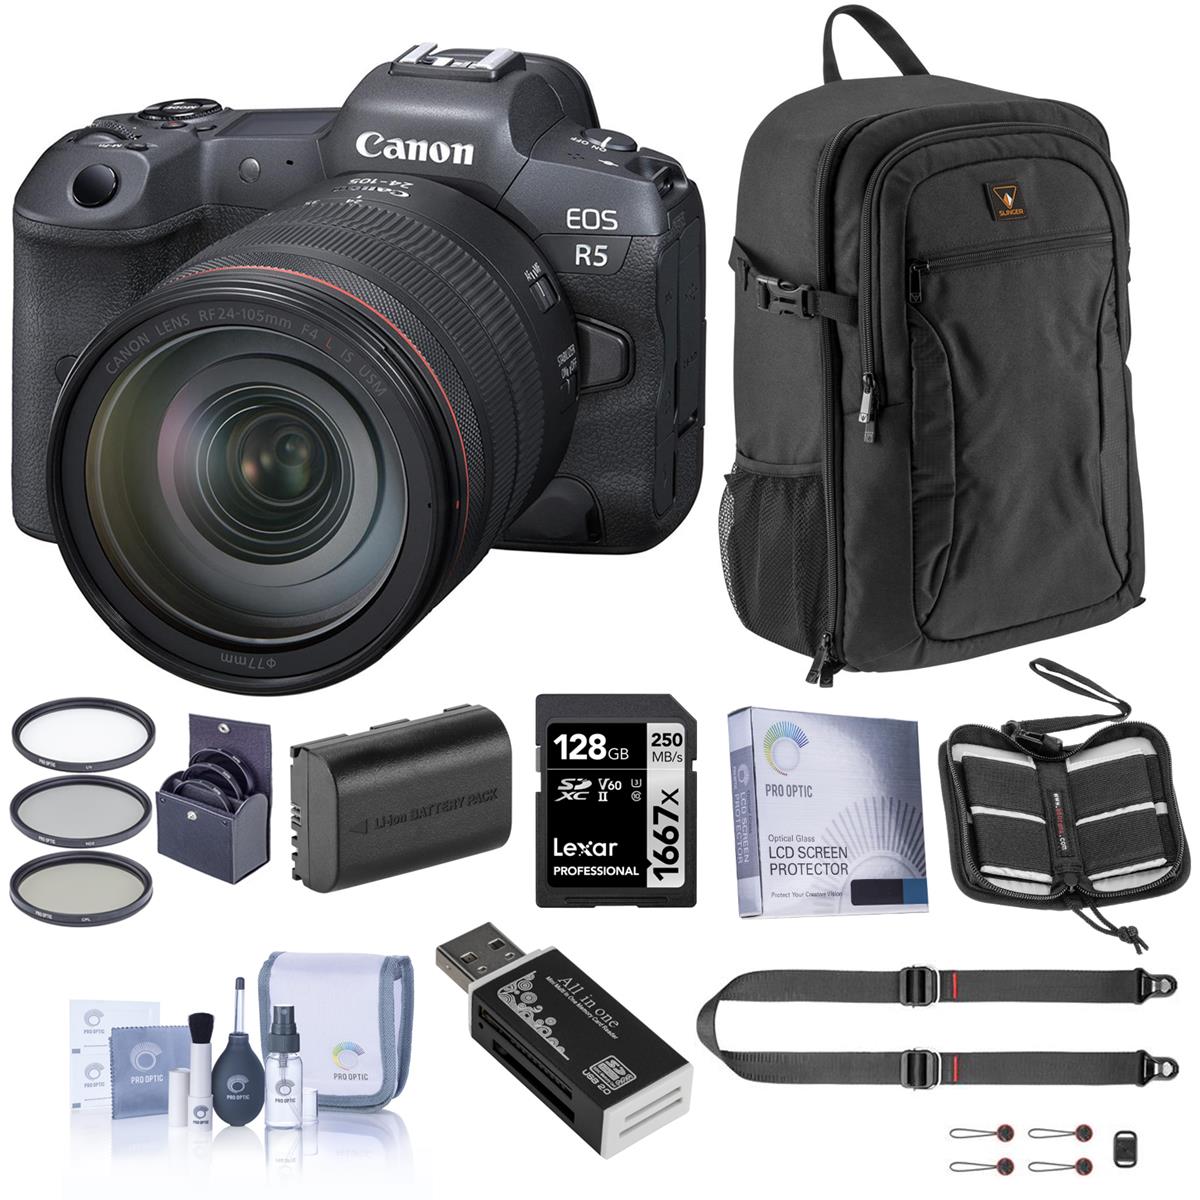 Image of Canon EOS R5 Mirrorless Camera with 24-105mm f/4 L IS USM Lens w/Accessory Kit